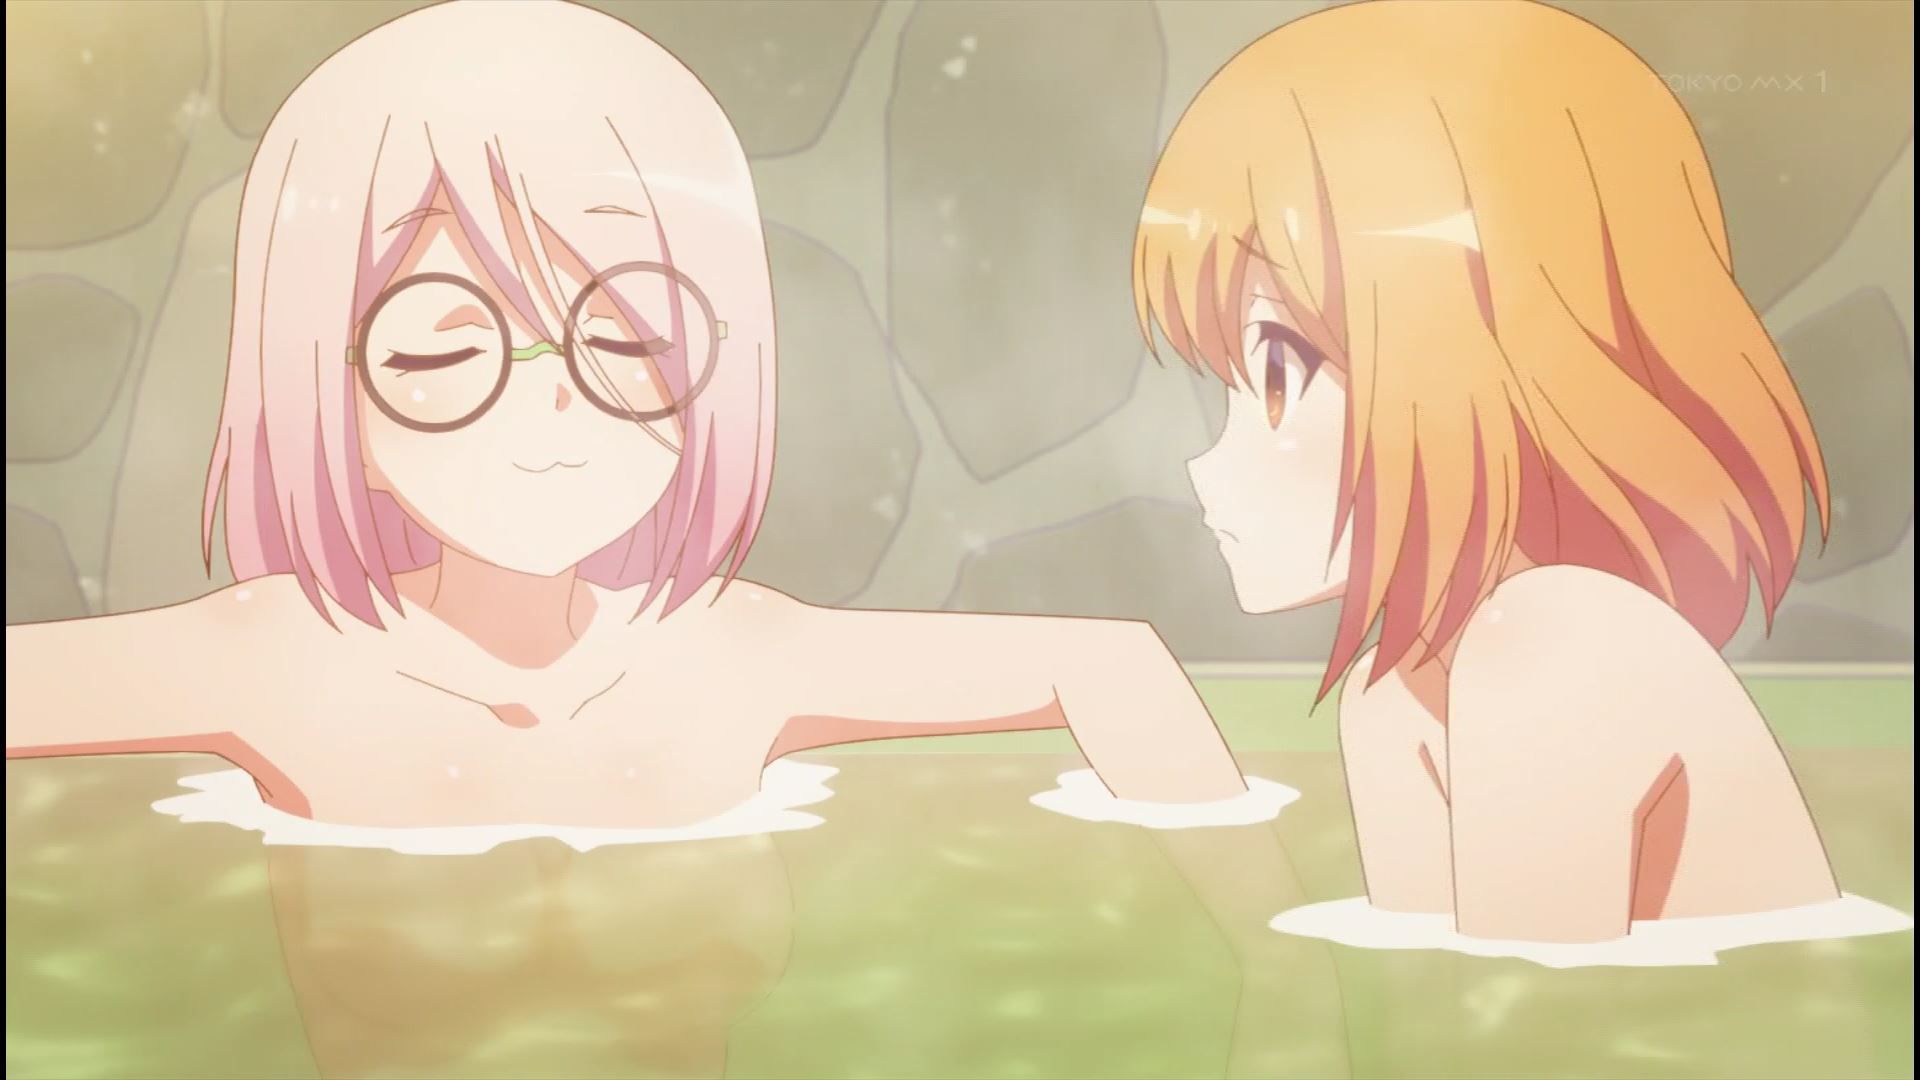 Erotic breasts and naked figure in erotic bathing scene of girls in the anime [Music girl] 2 story! 2